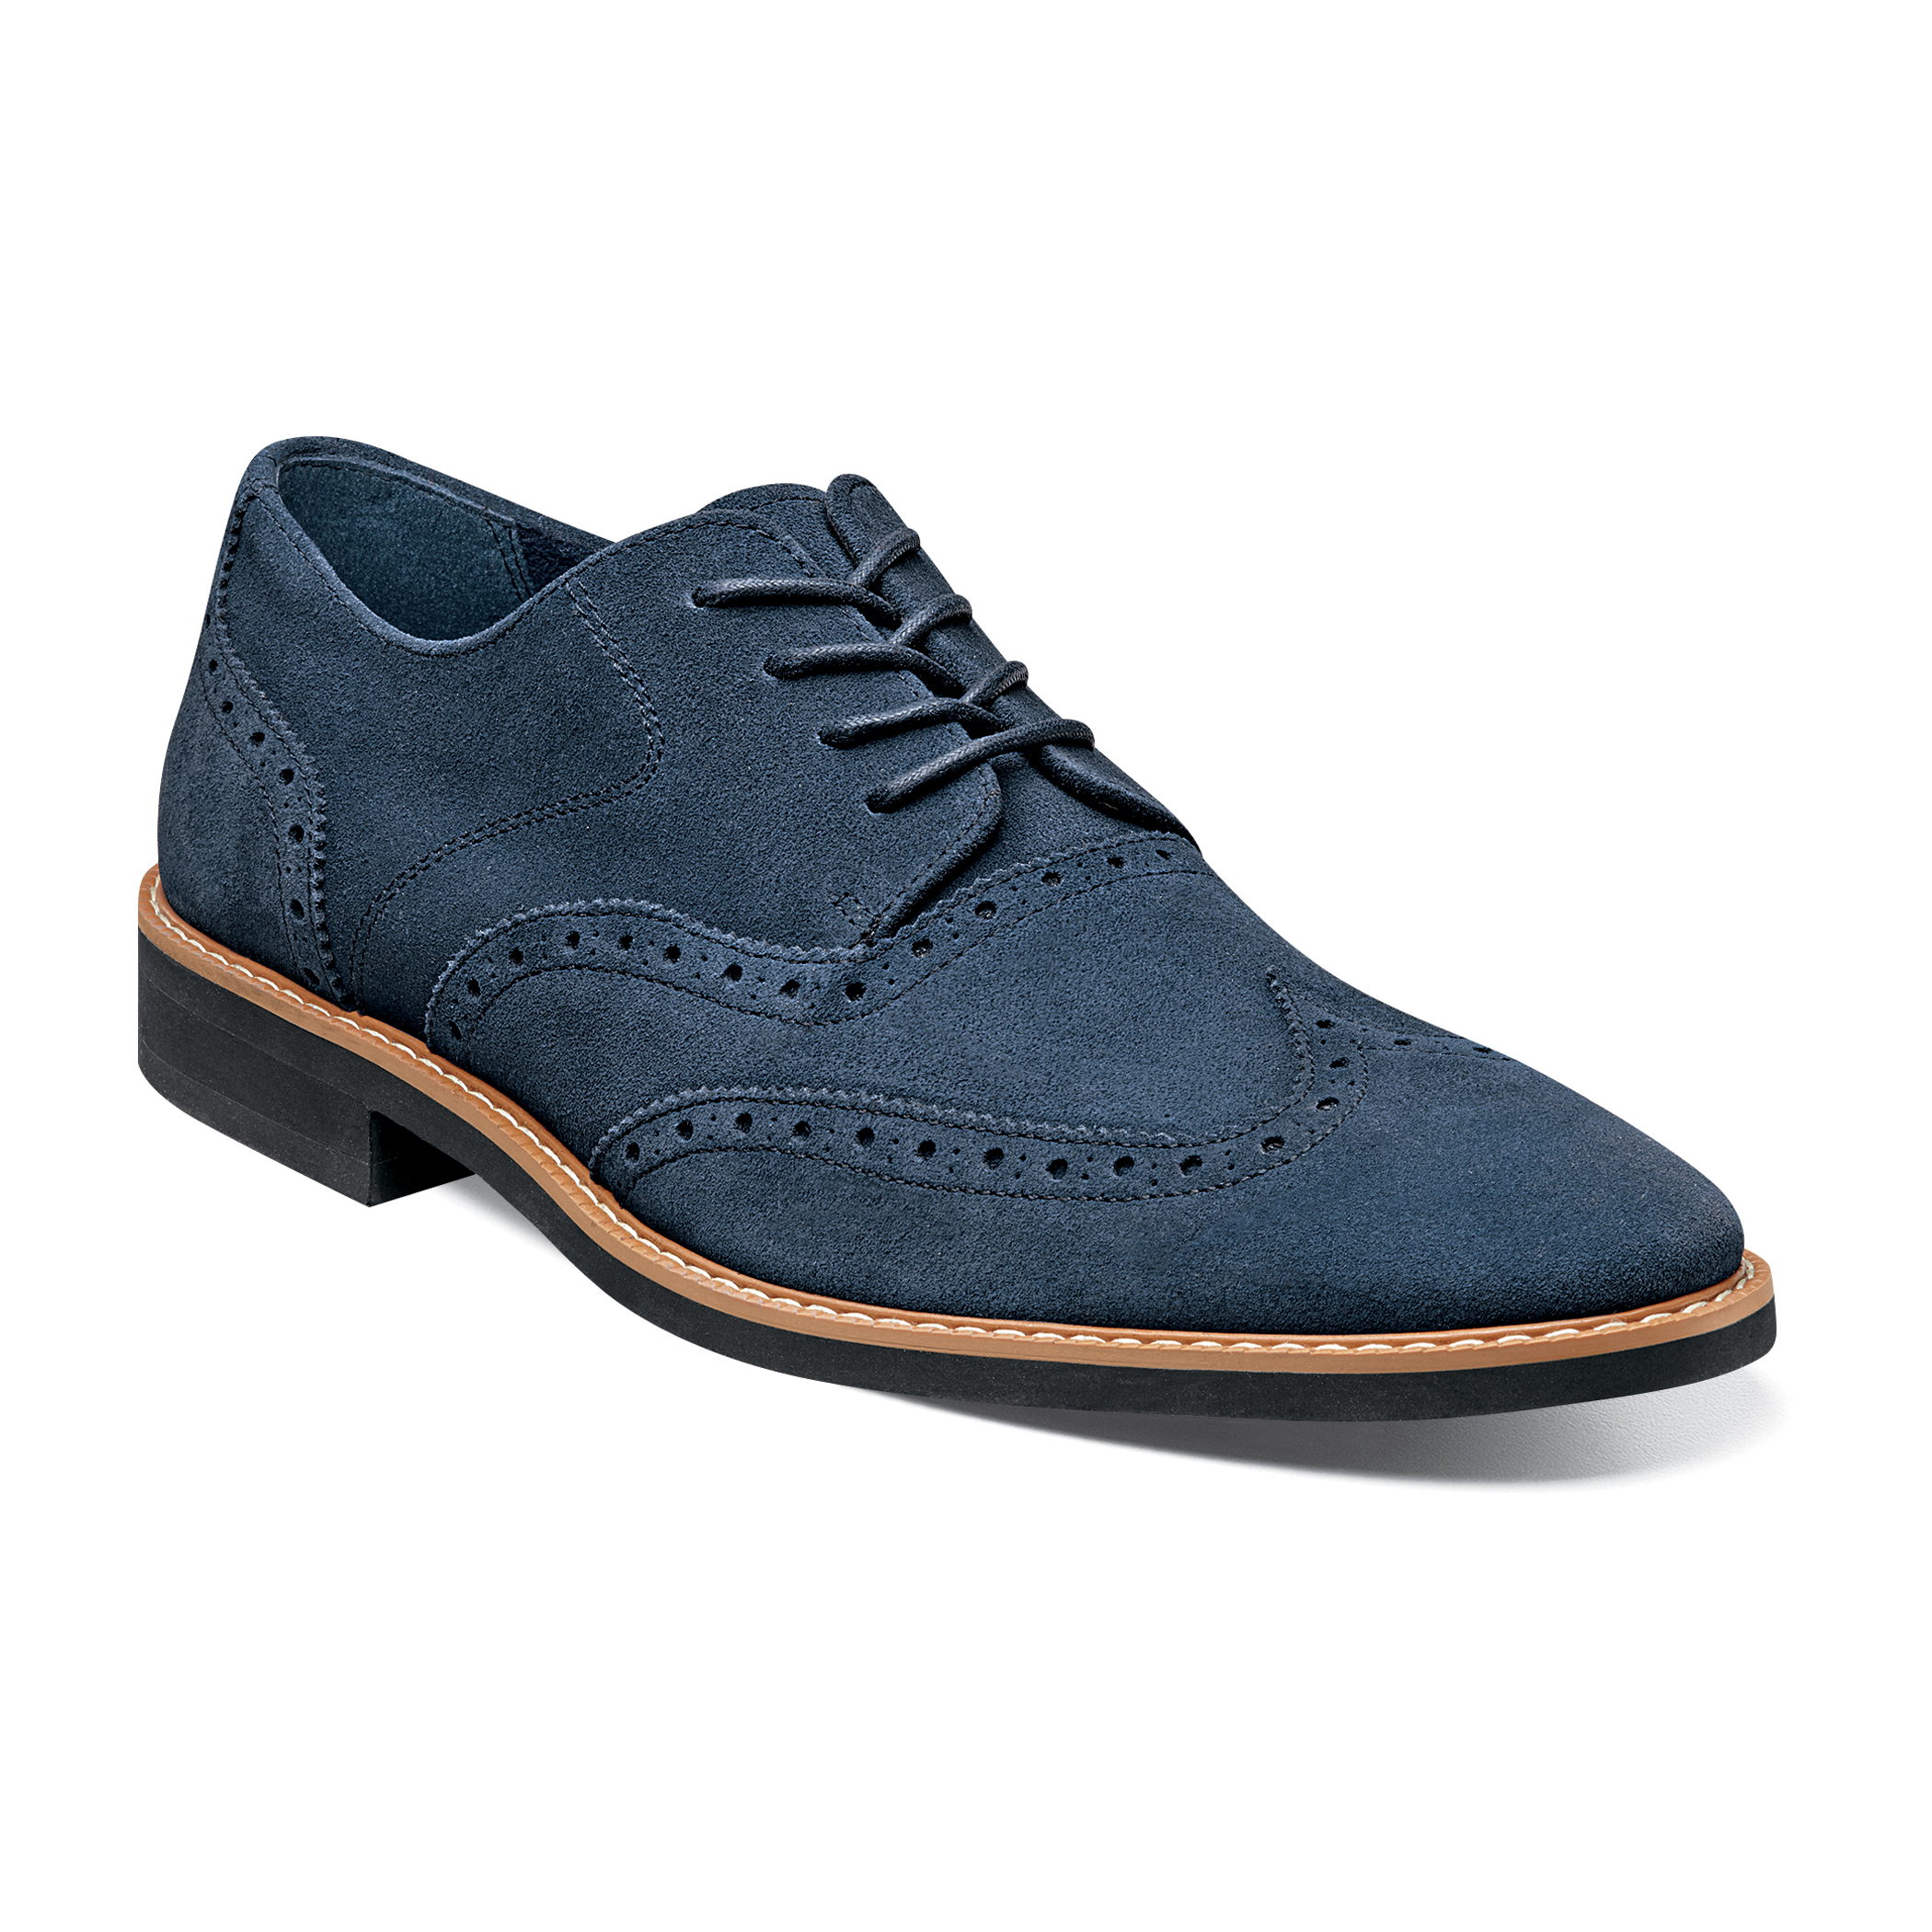 Stacy Adams Sloane Navy Suede Wingtip Shoes 24930 - $84.90 :: Upscale ...